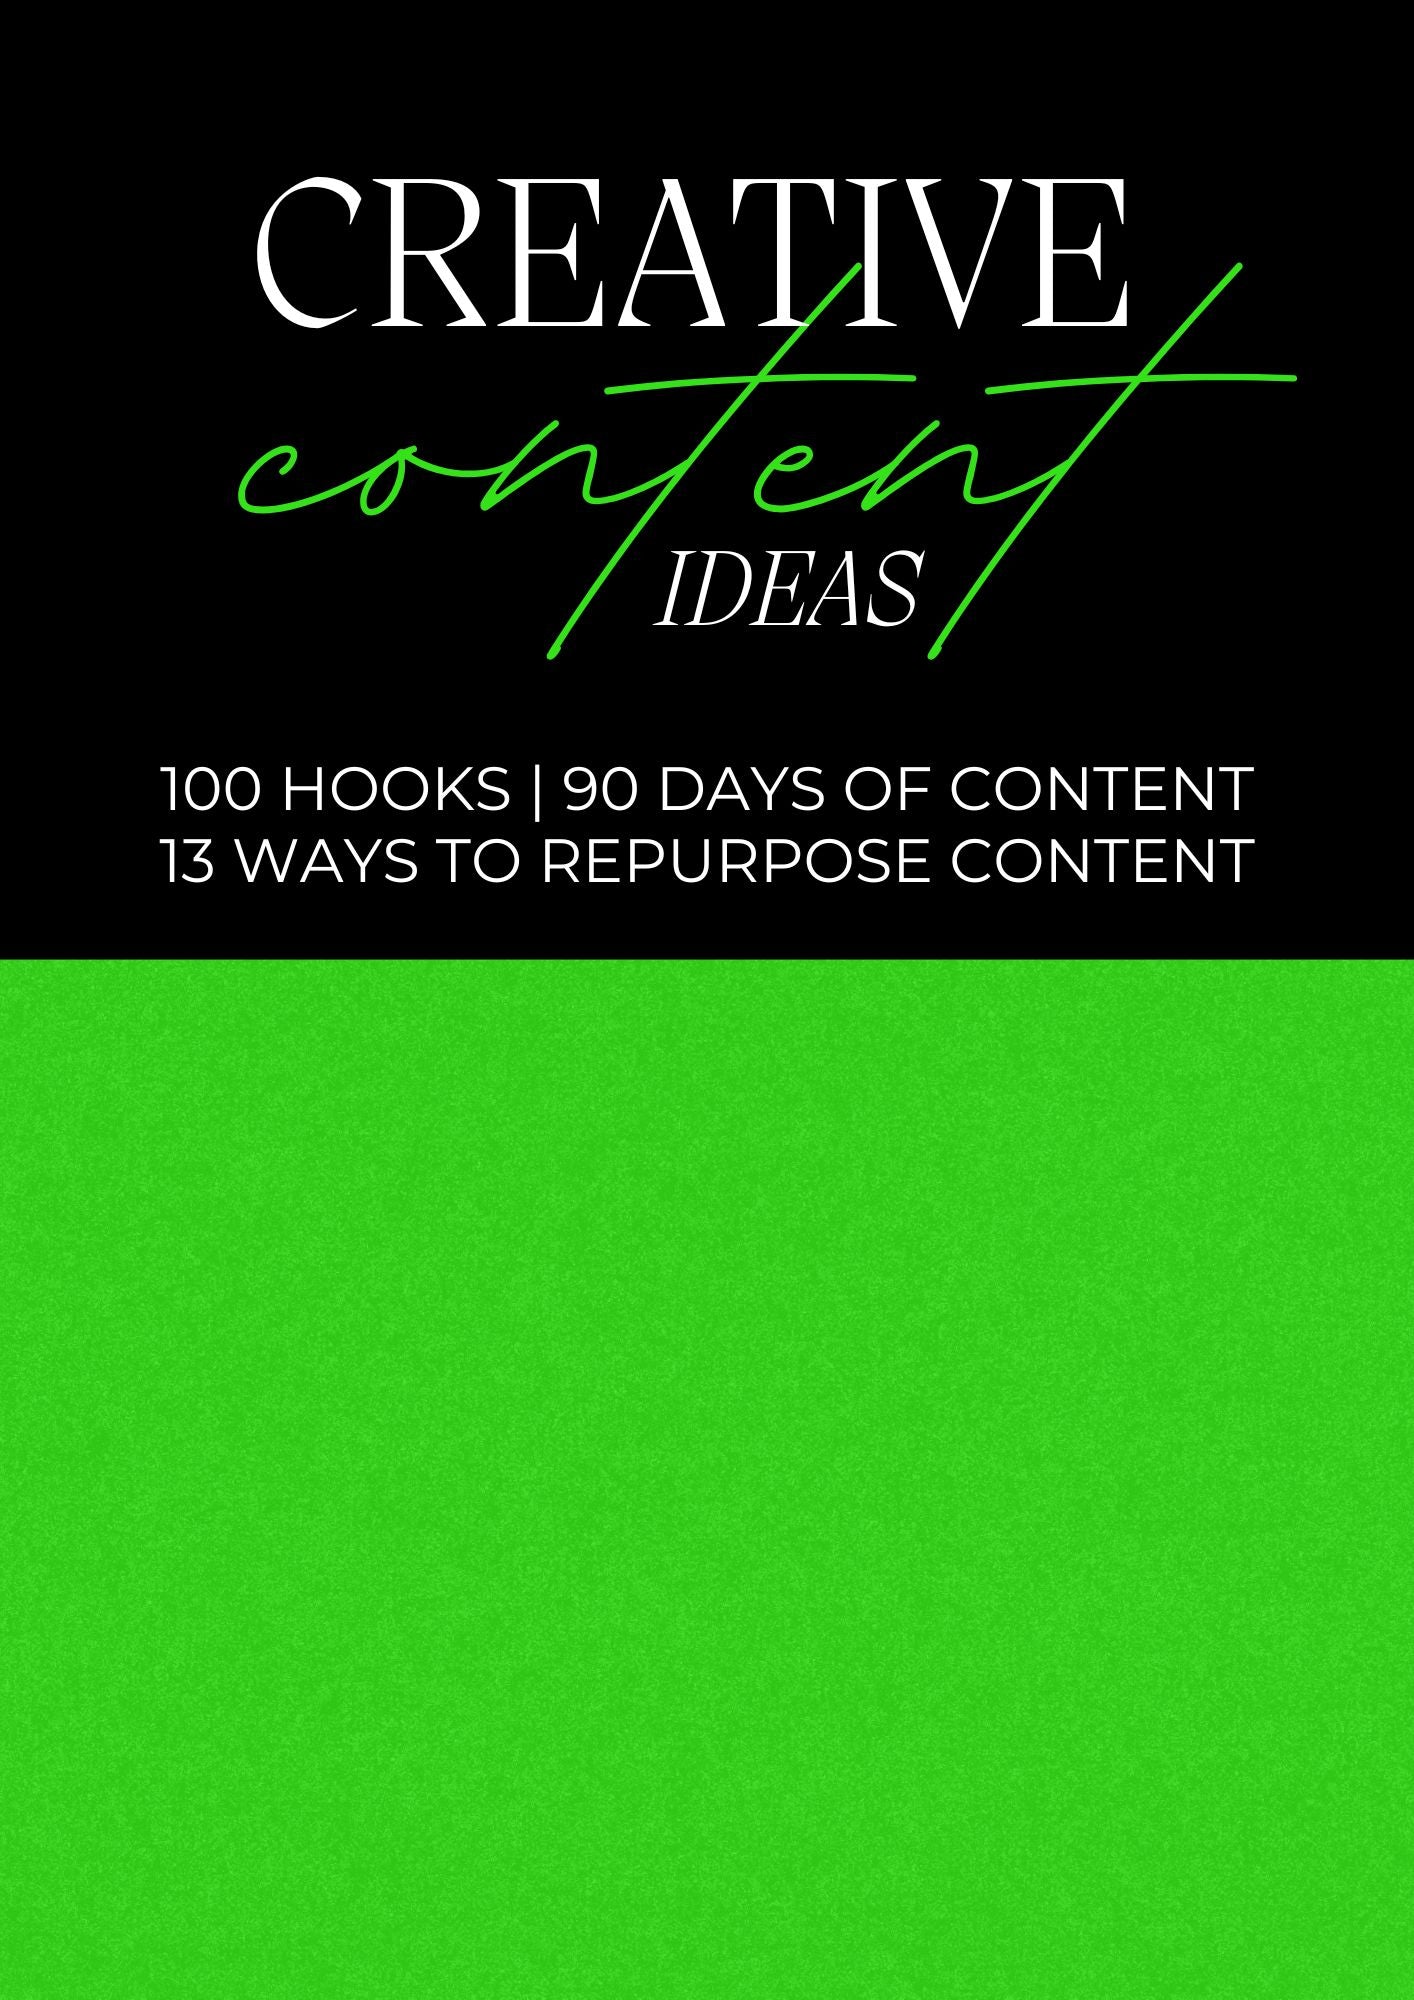 Creative Content Ideas: 100 Hooks, 90 Days Of Content, & 13 Ways To Repurpose Content + Resell Rights